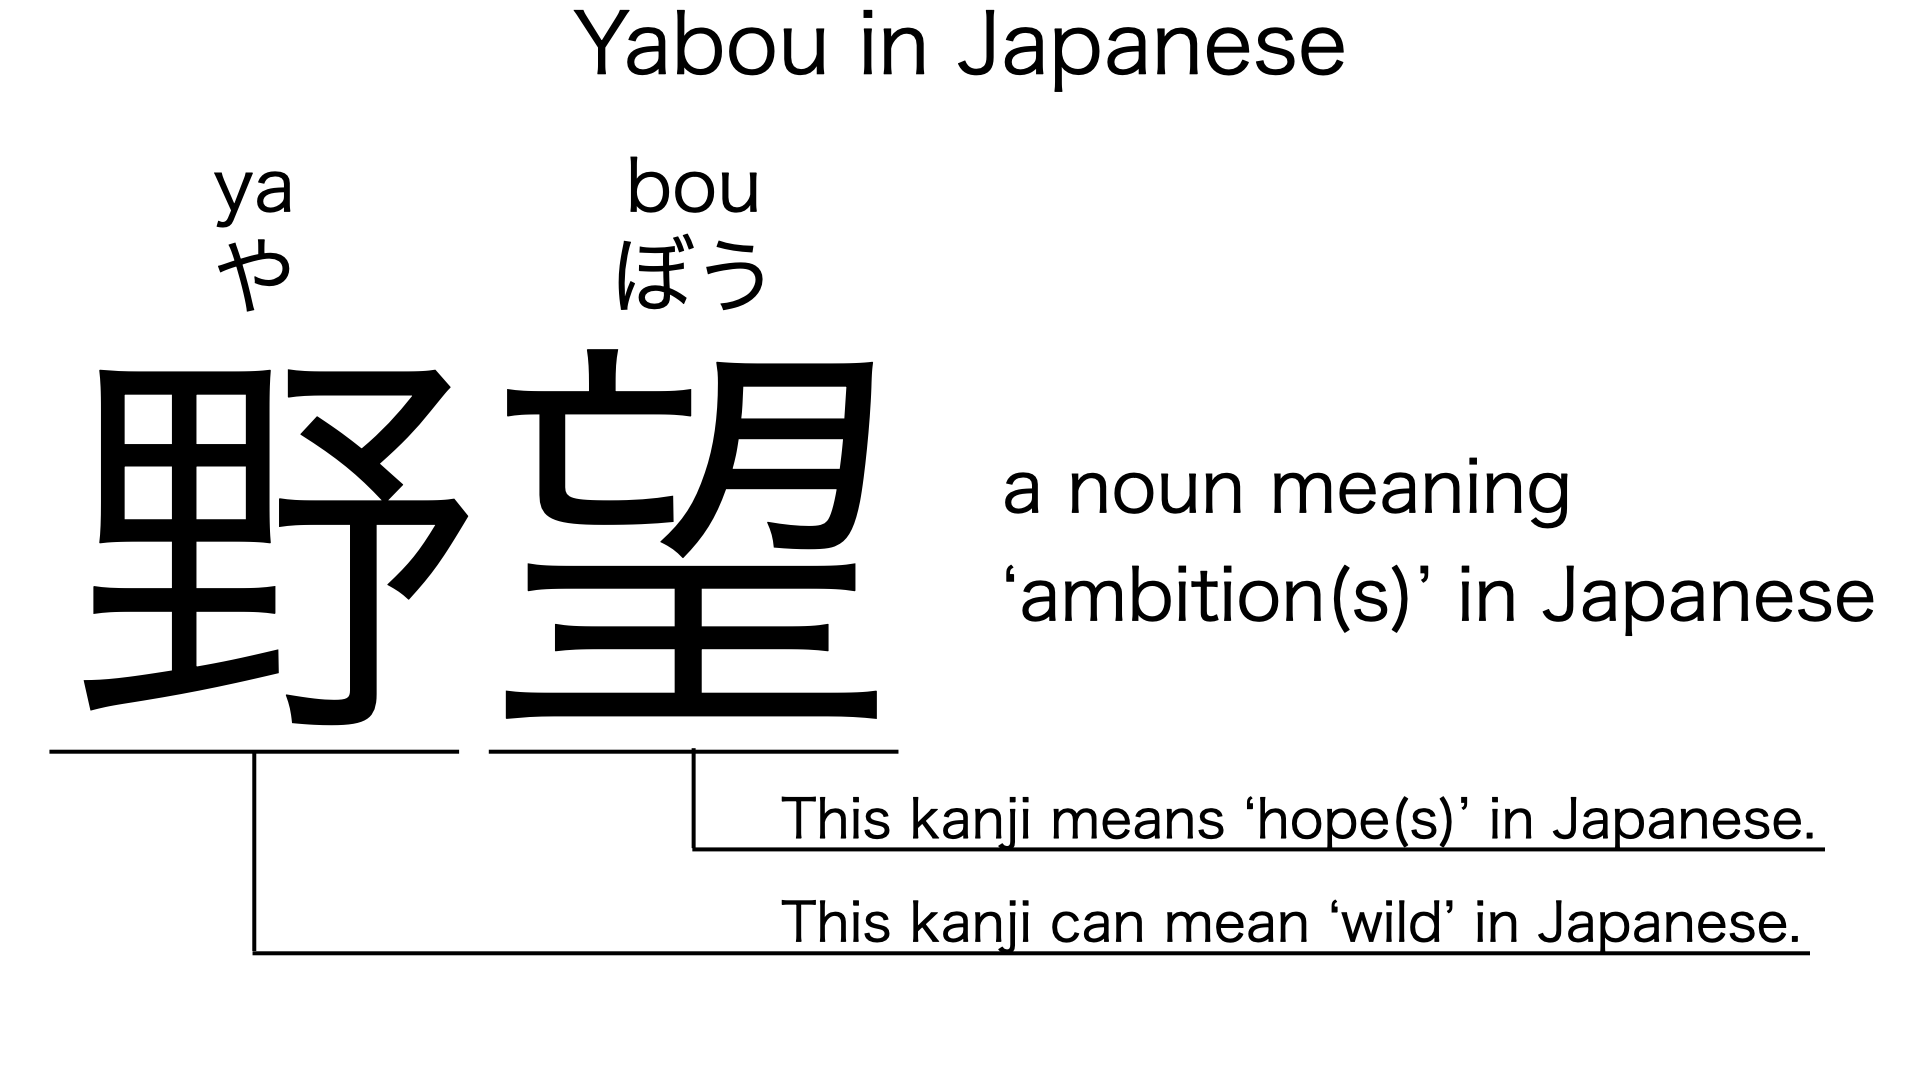 yabou in japanese